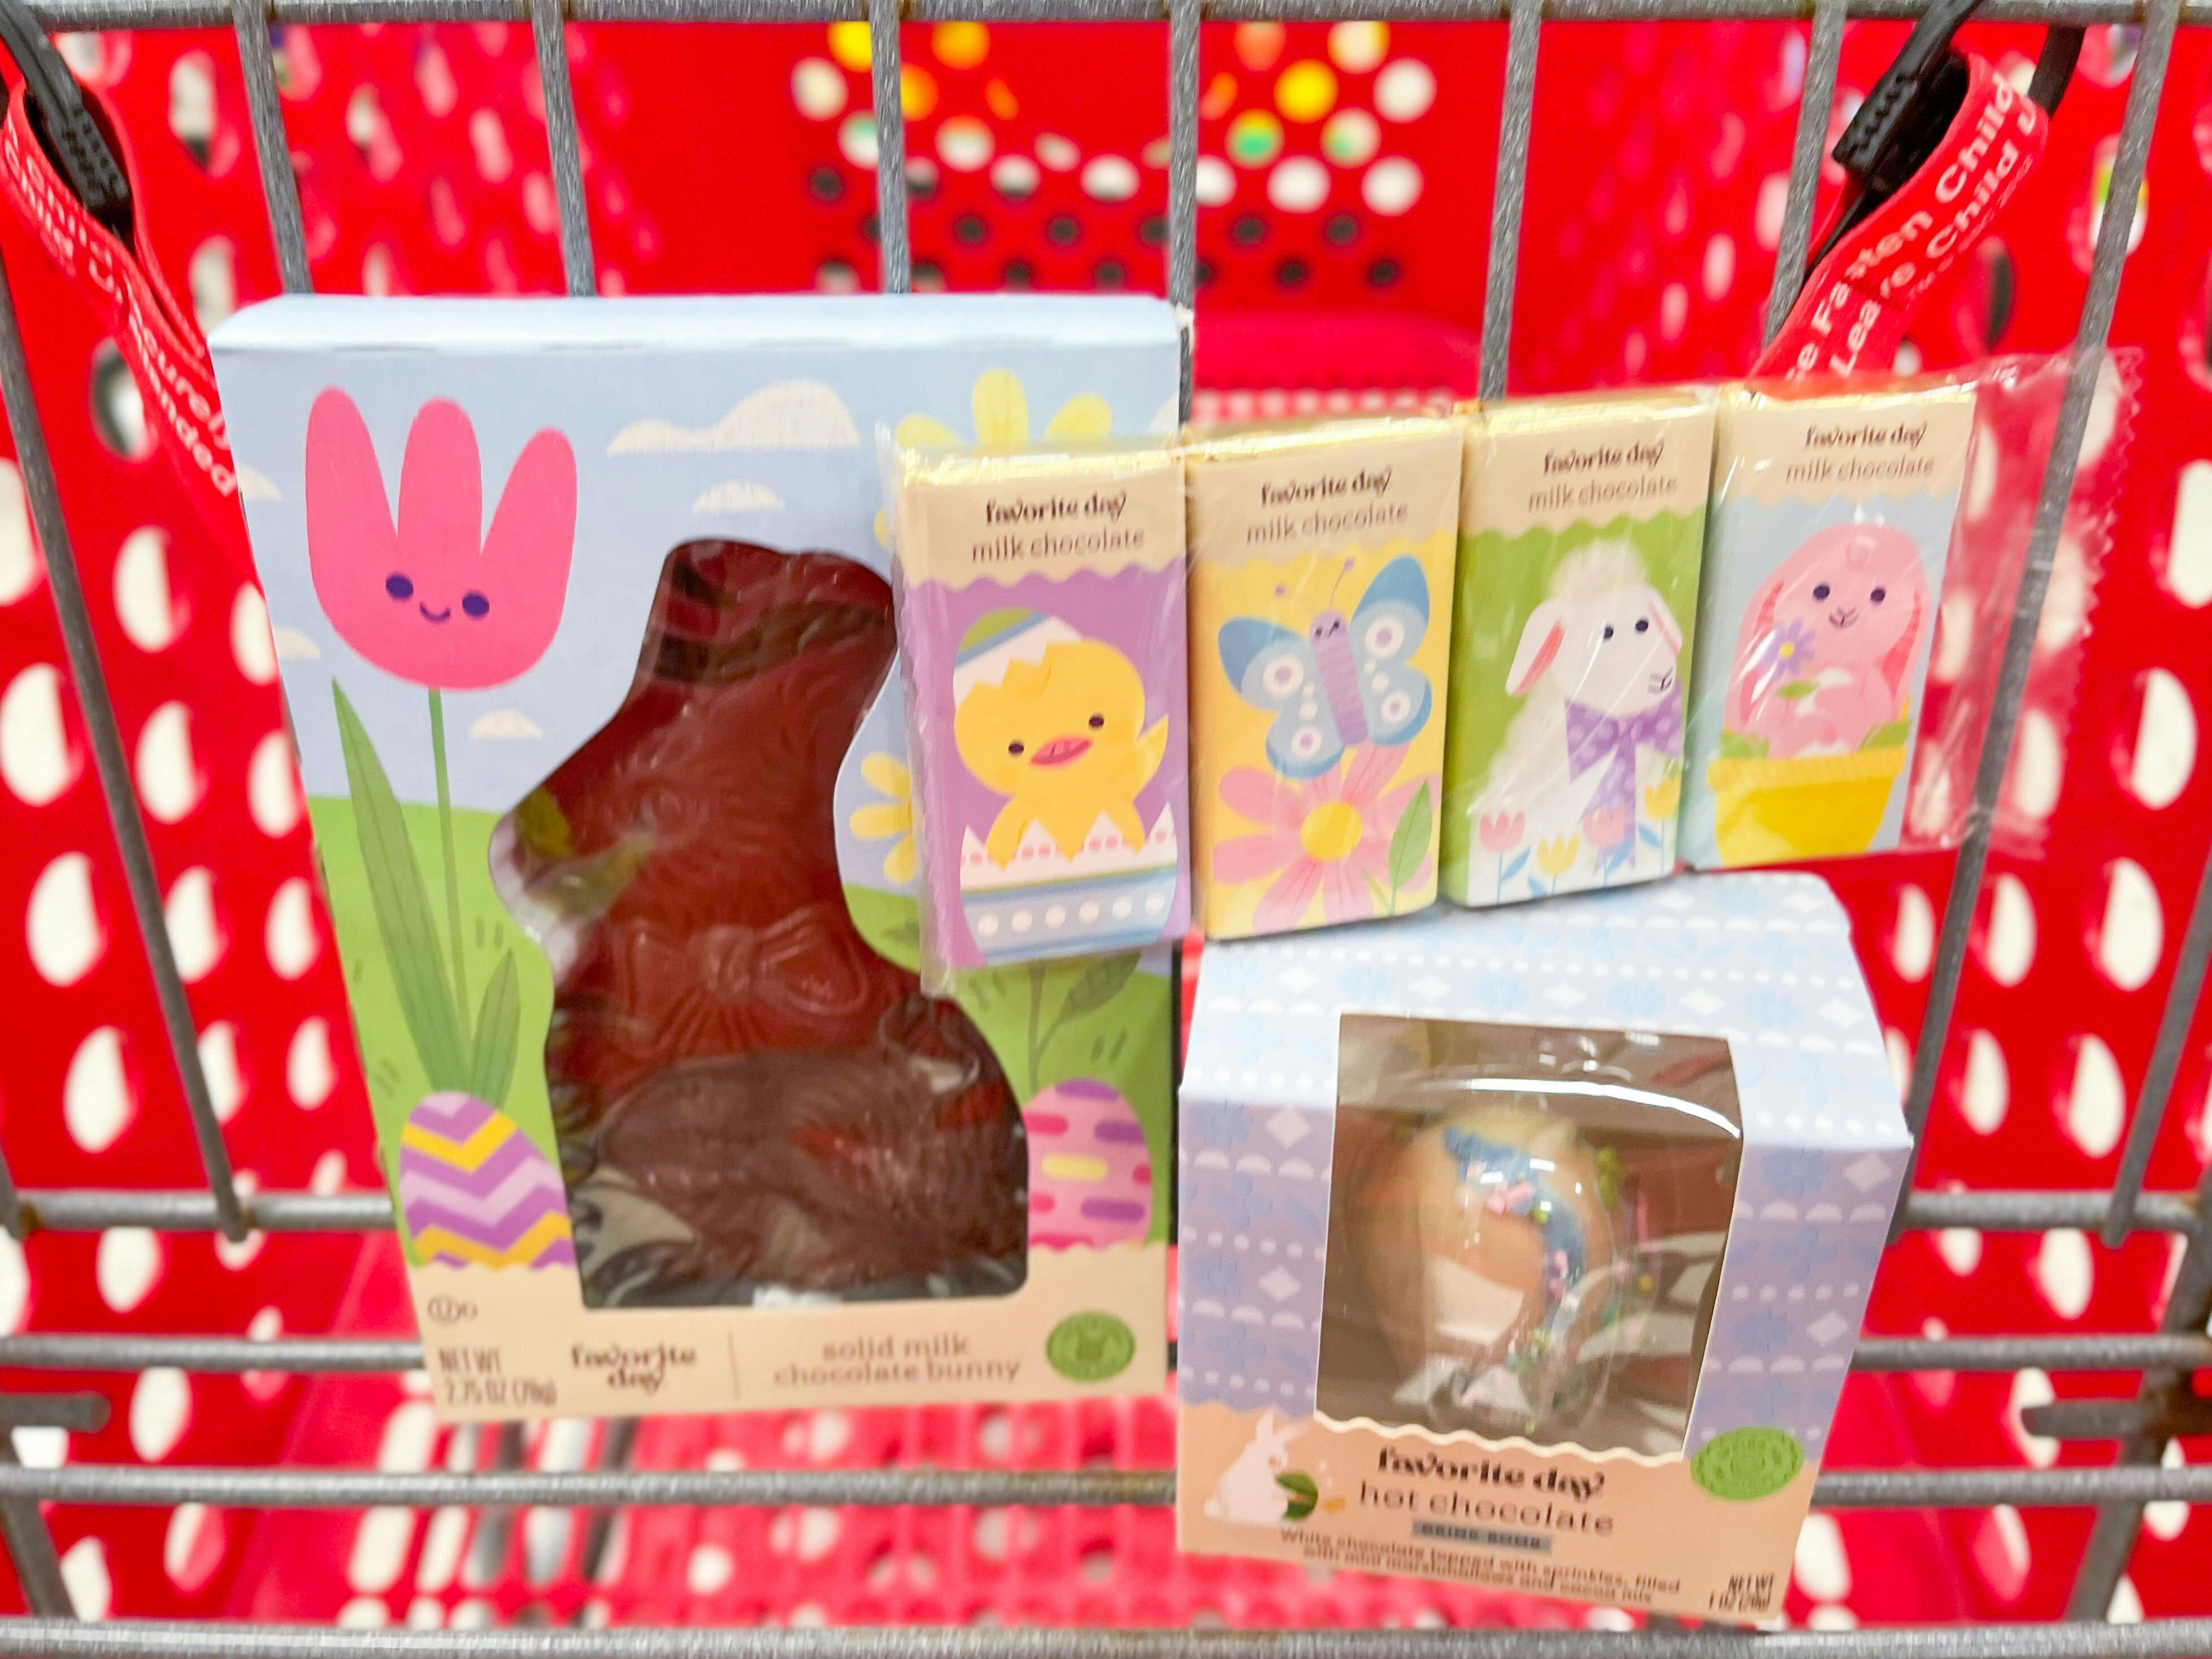 Favorite-Day-Easter-Candy-chocolate-Target-2023-01